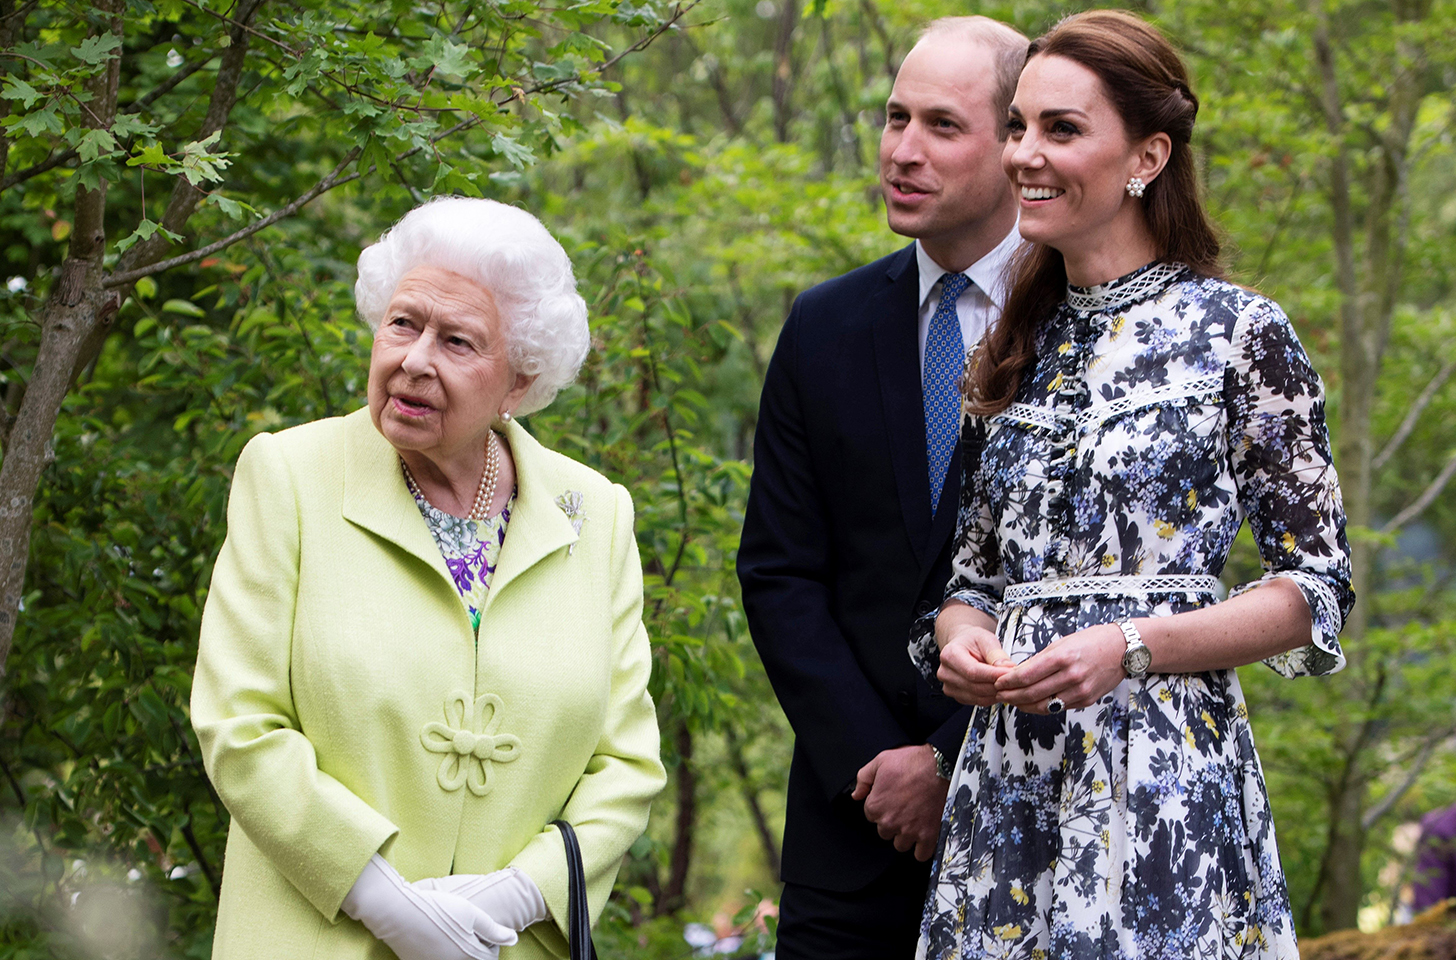 Queen Elizabeth on the left, talking to Prince William and Kate Middleton